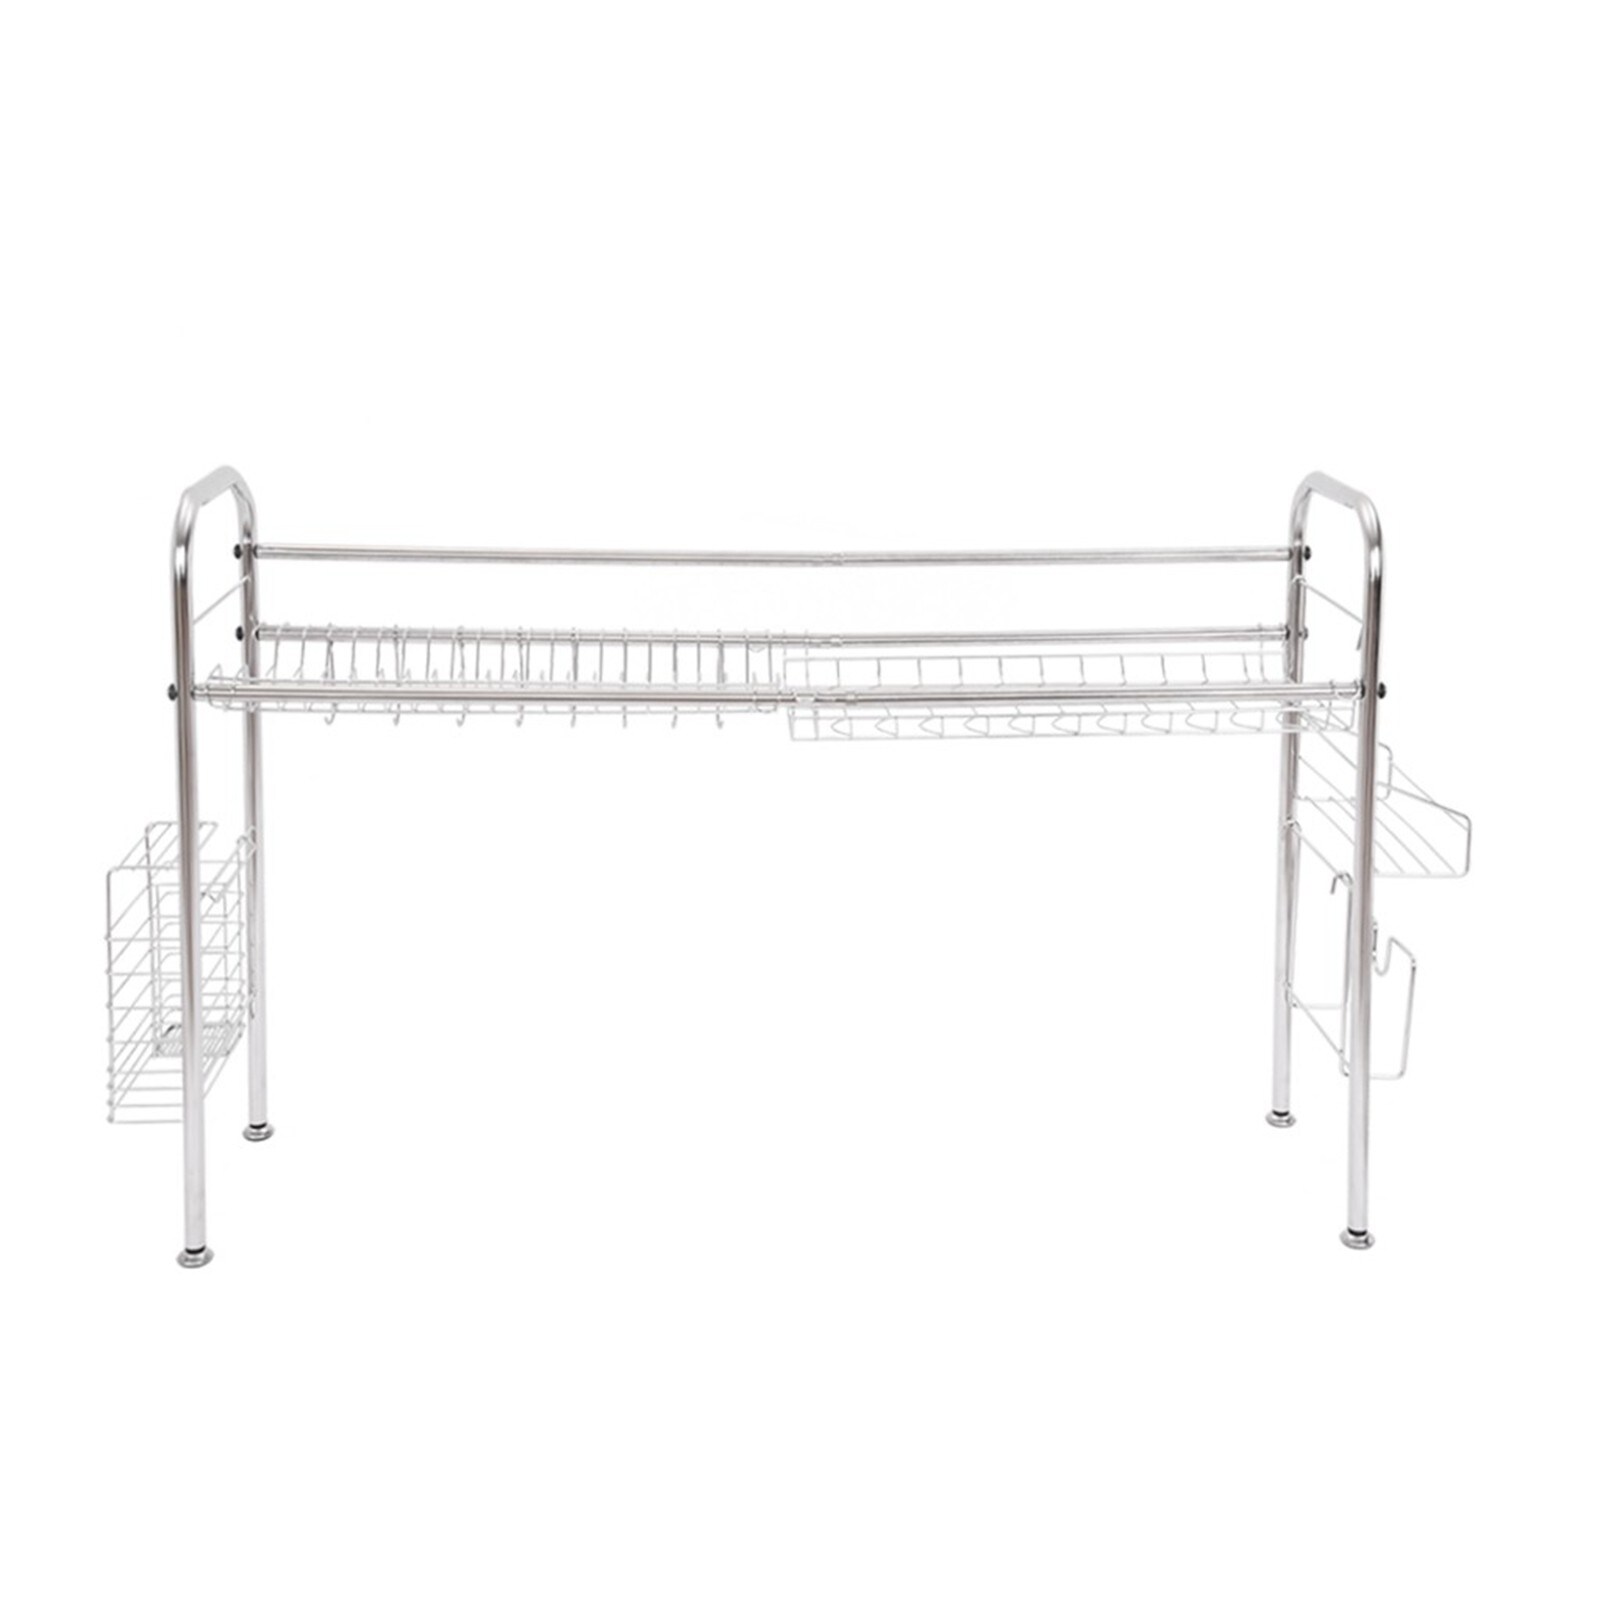 https://ak1.ostkcdn.com/images/products/is/images/direct/46bfdbc559fcb834a157c6d725dfec4b29a82a16/Dish-Drying-Rack-Over-Sink-Display-Drainer-Kitchen-Utensils-Holder.jpg